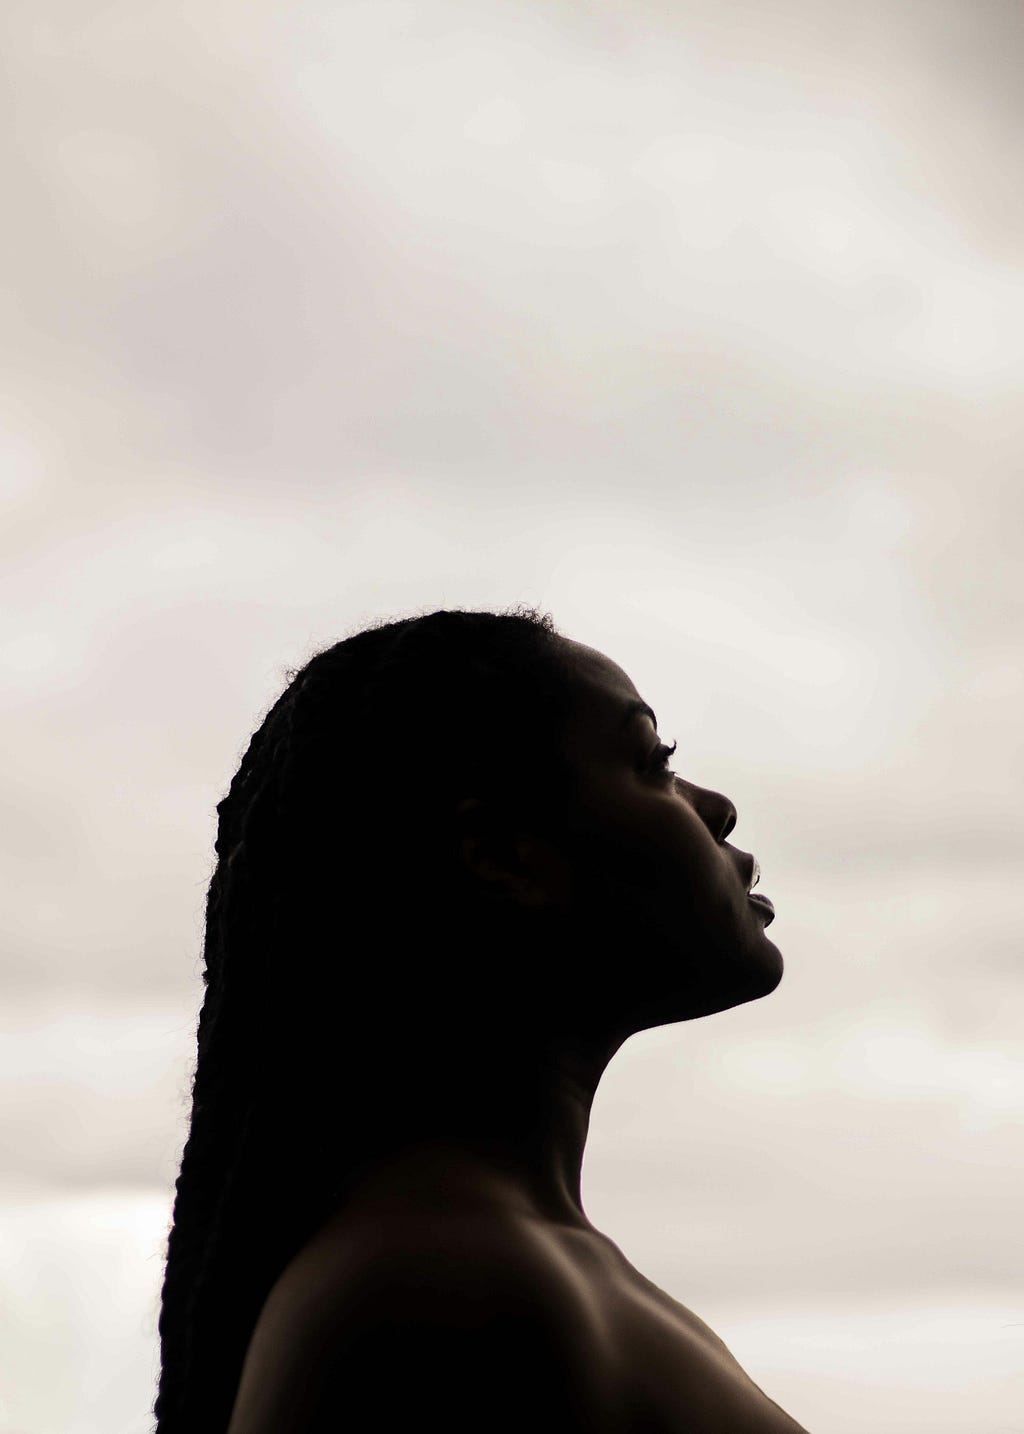 Black woman with long braids looks to the sky